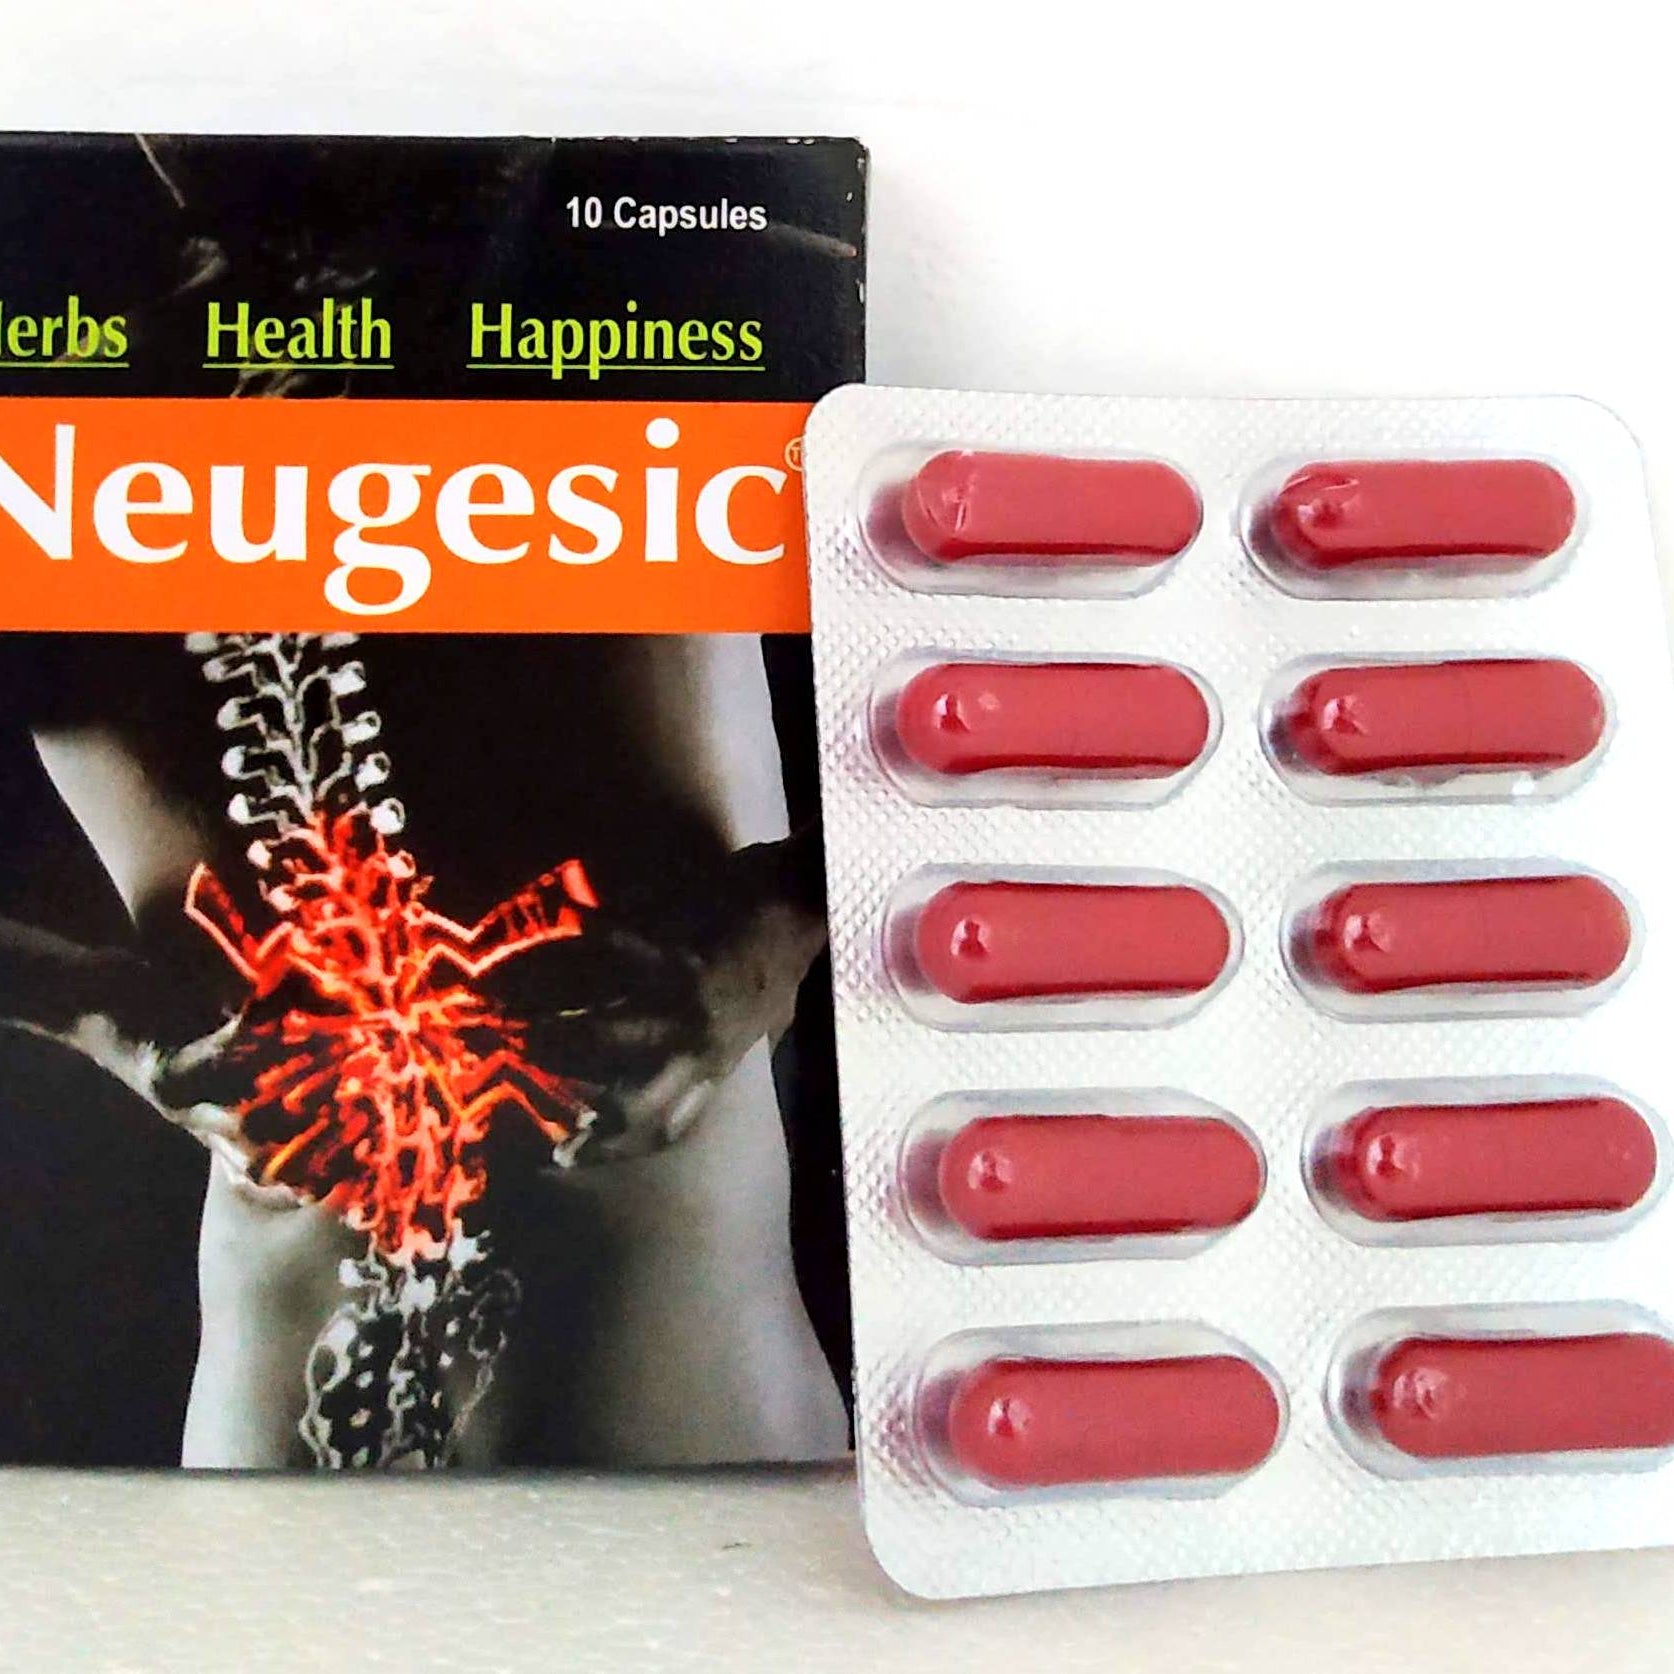 Shop Neugesic Capsules - 10Capsules at price 65.00 from Nisarg Pharma Online - Ayush Care